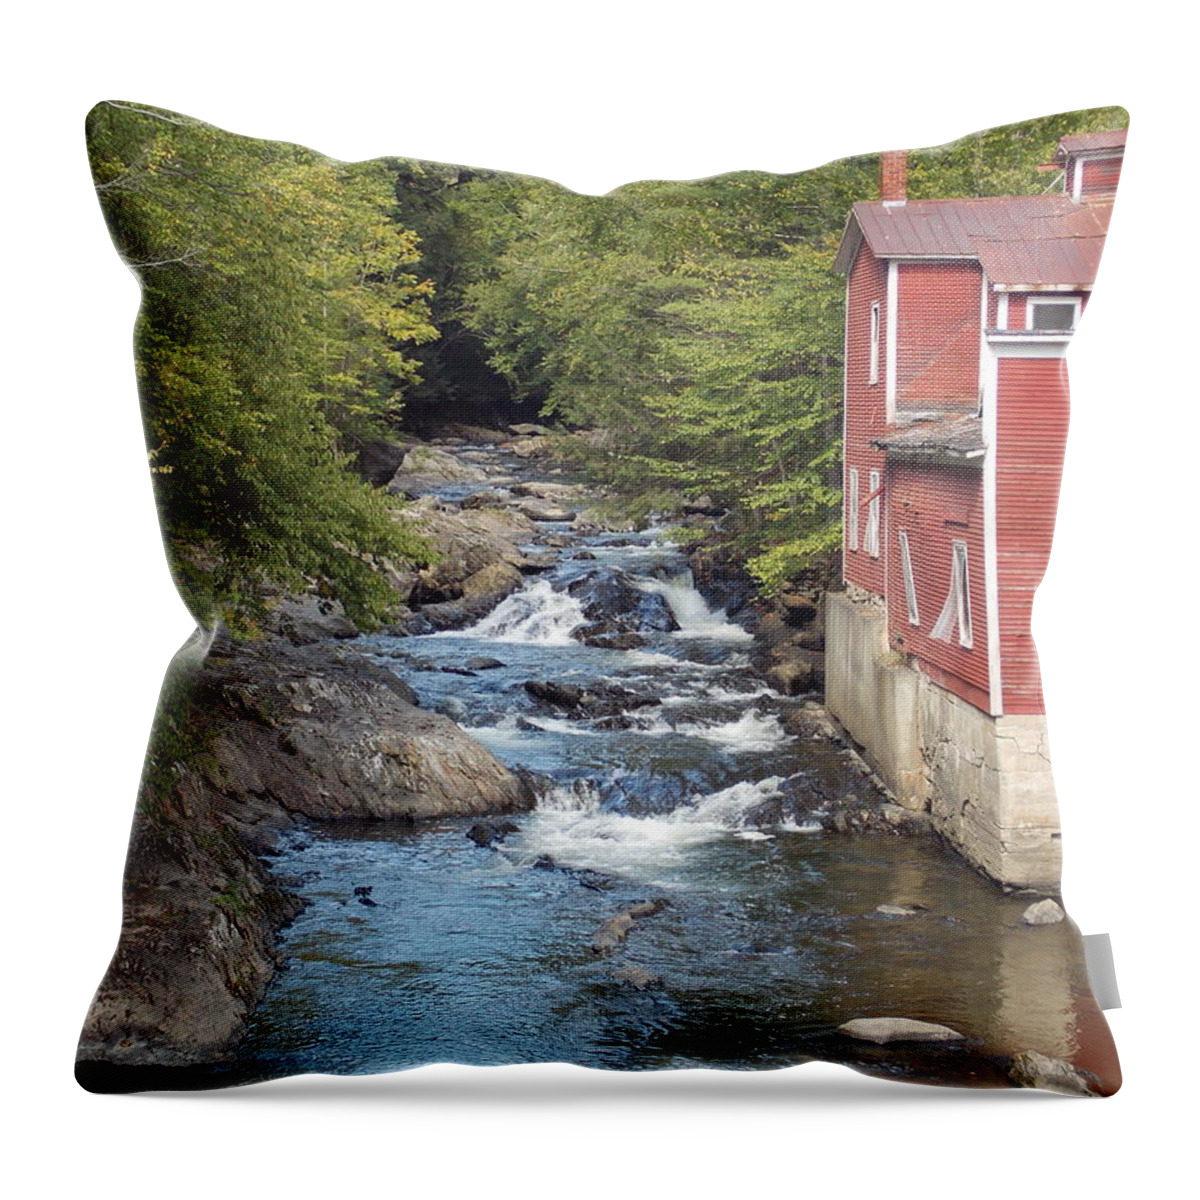 Gihone River Throw Pillow featuring the photograph Gihon River by Catherine Gagne